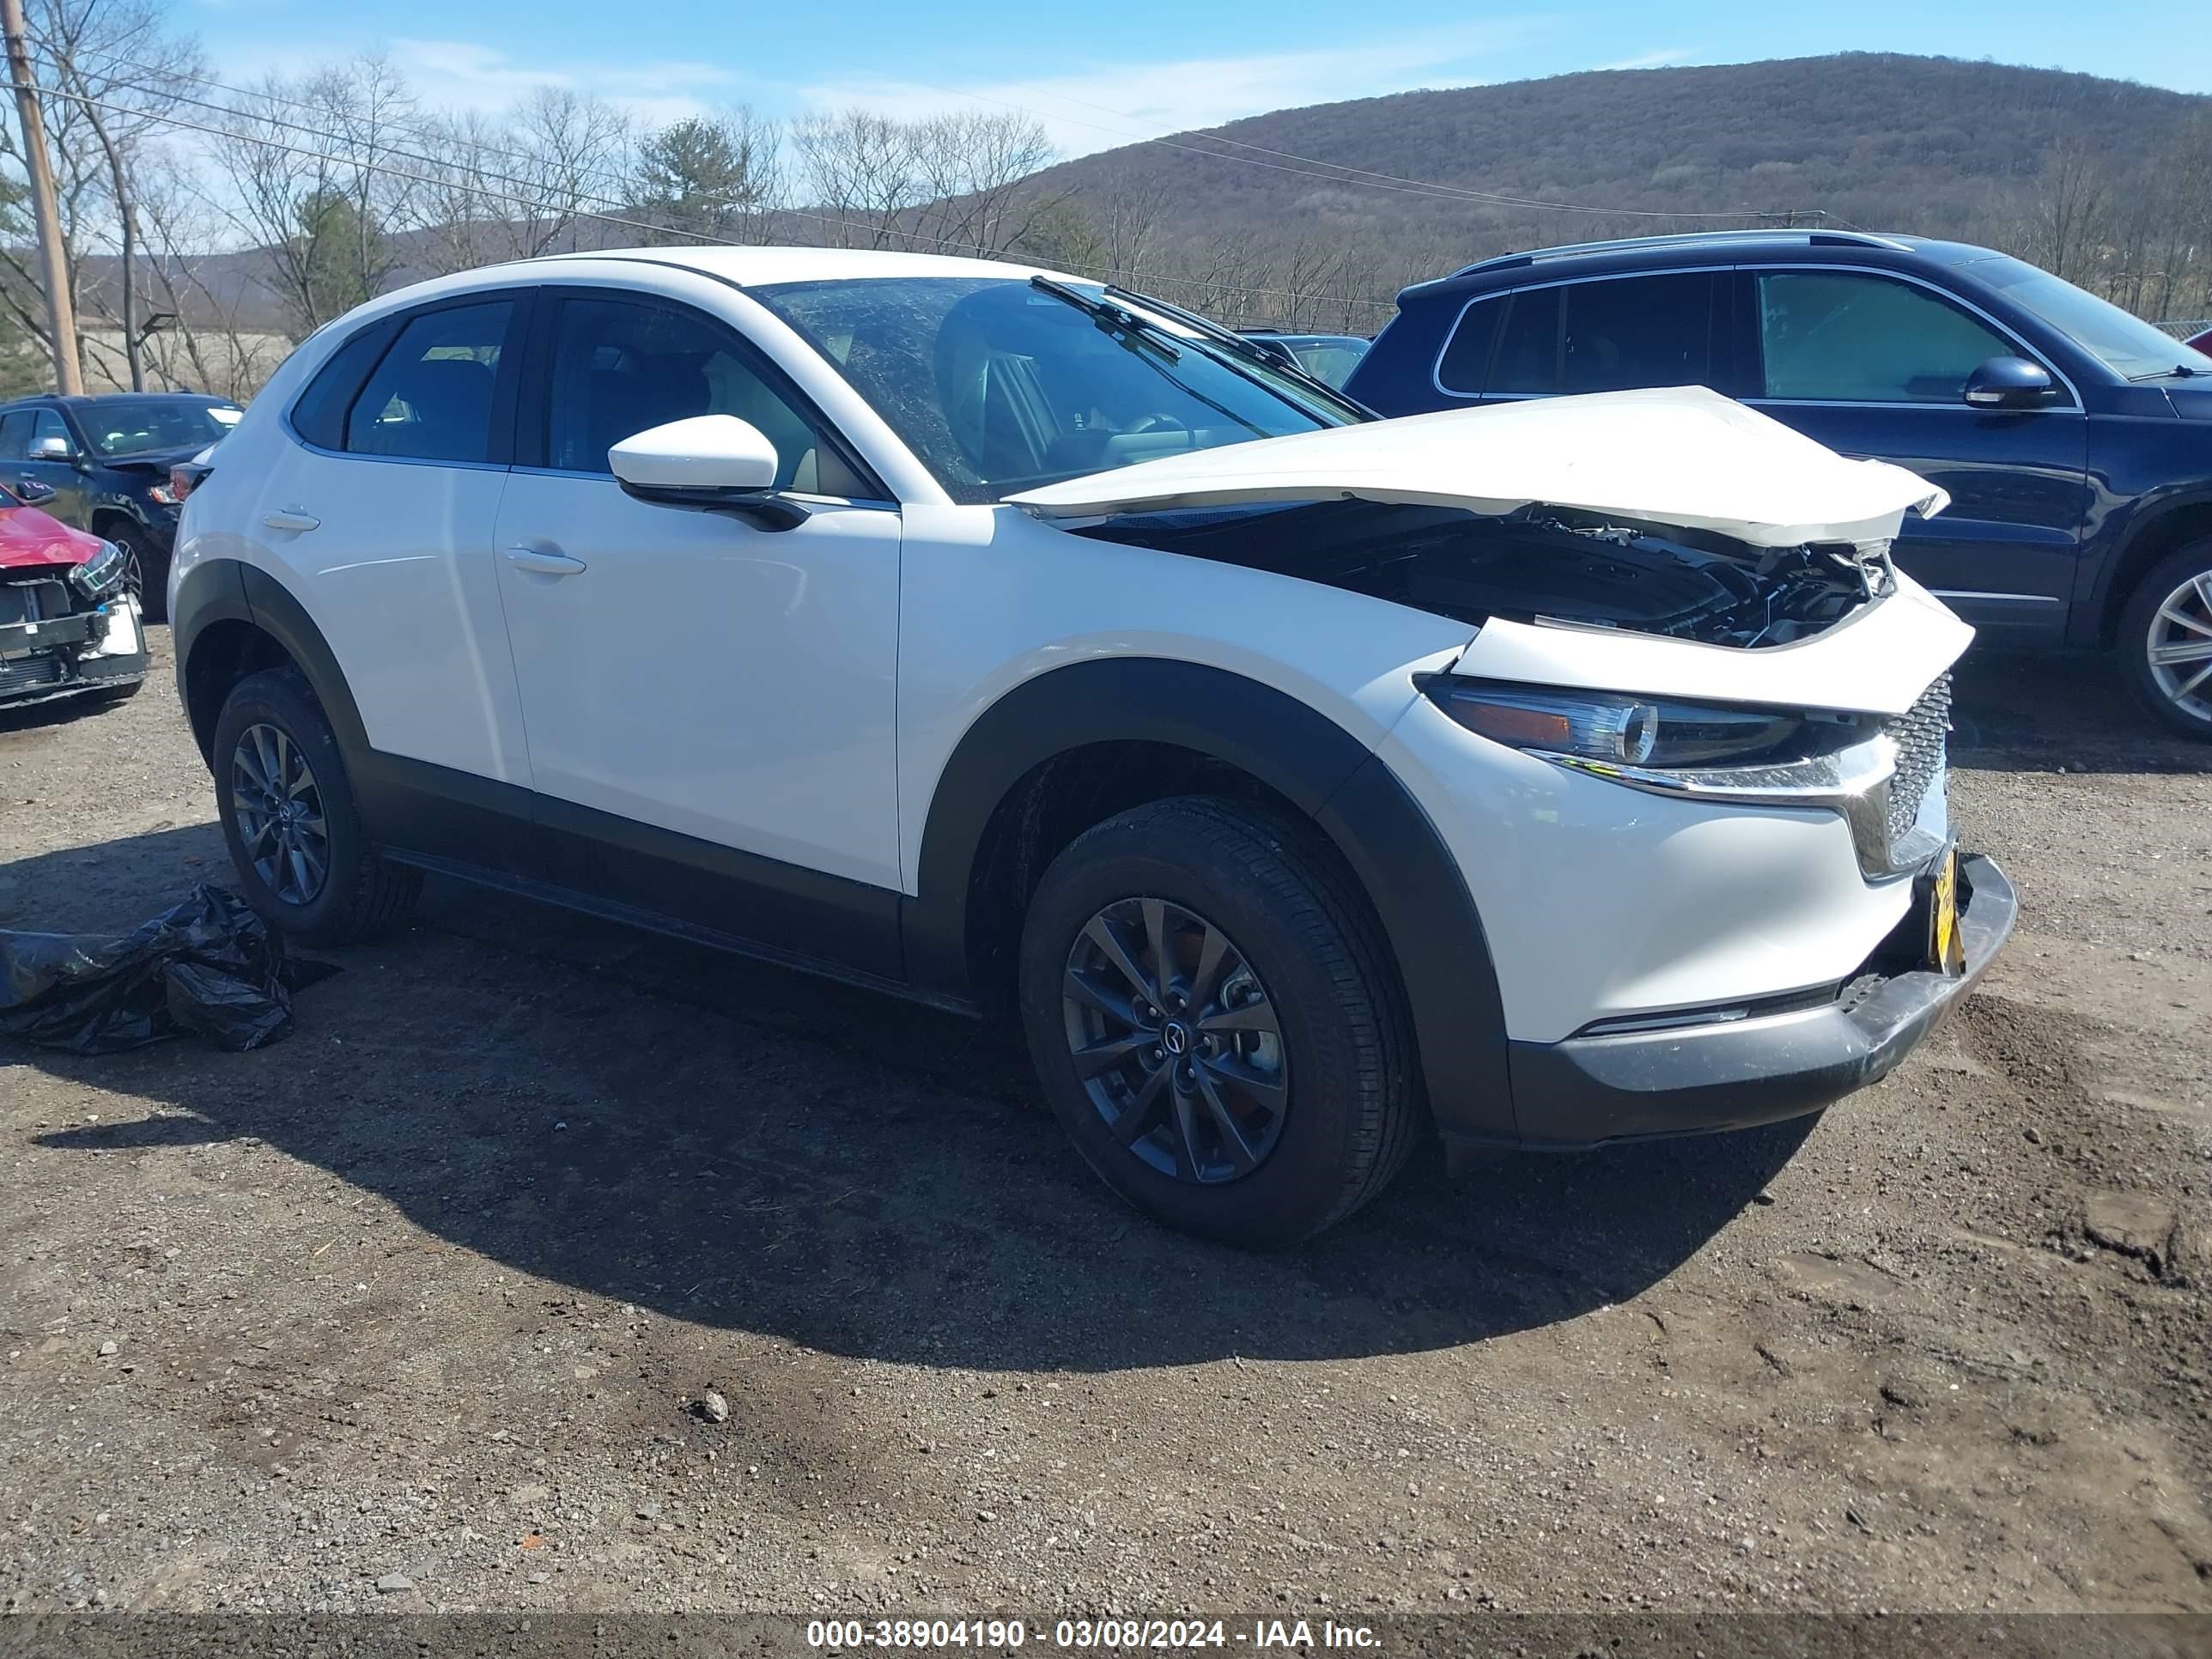 vin: 3MVDMBAMXRM635643 3MVDMBAMXRM635643 2024 mazda cx-30 2500 for Sale in 07865, 985 State Route 57, Port Murray, New Jersey, USA